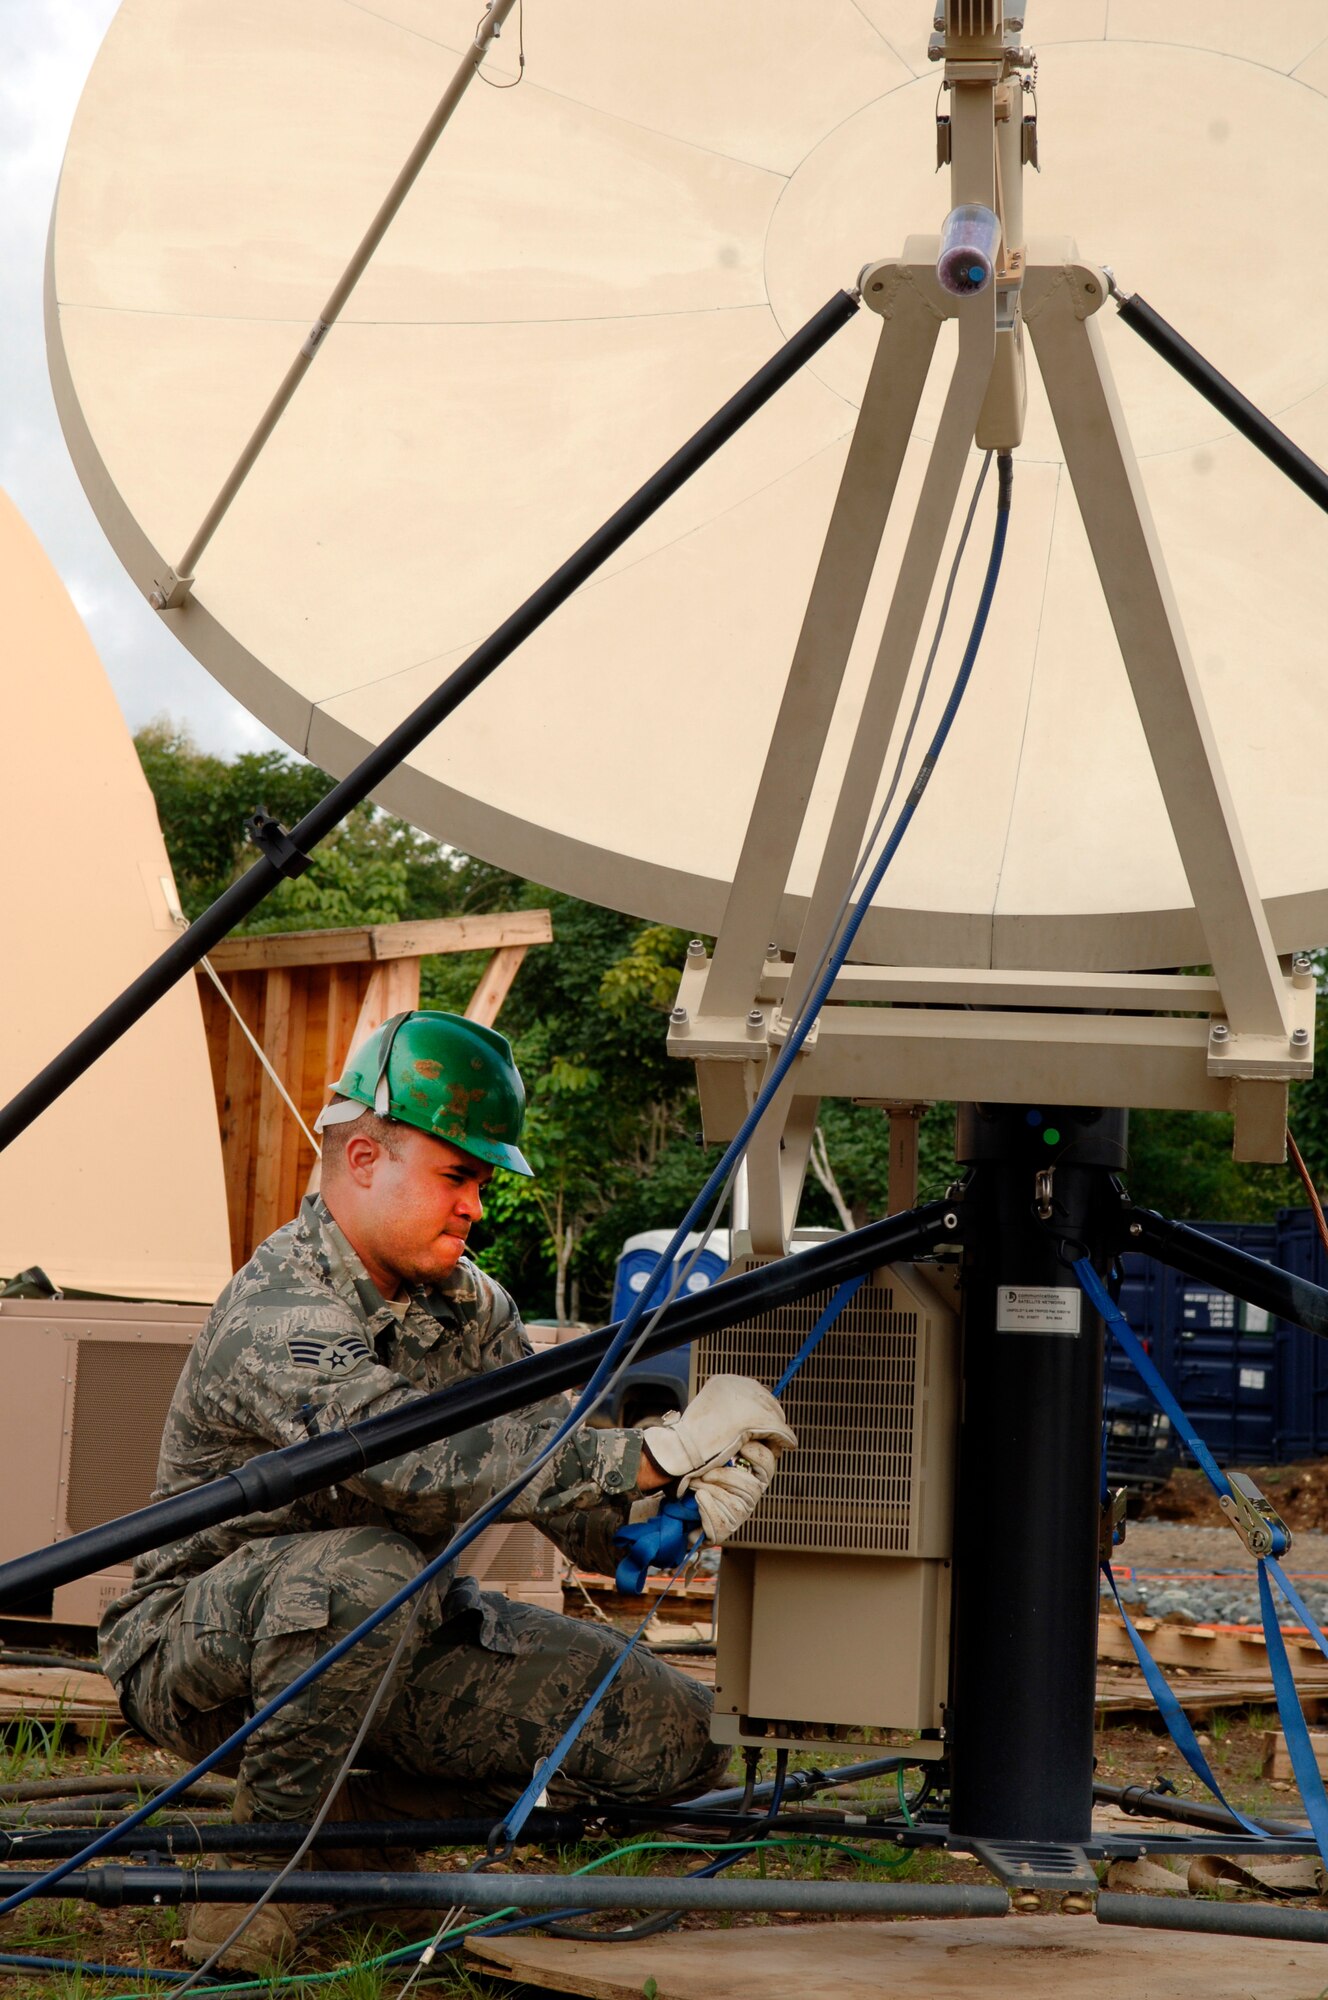 Senior Airman Cesar Morales, deployed from the 32nd Combat Communications Squadron, secures the base of the satellite array during New Horizons Panama 2010. (U.S. Air Force photo/Tech. Sgt. Eric Petosky)